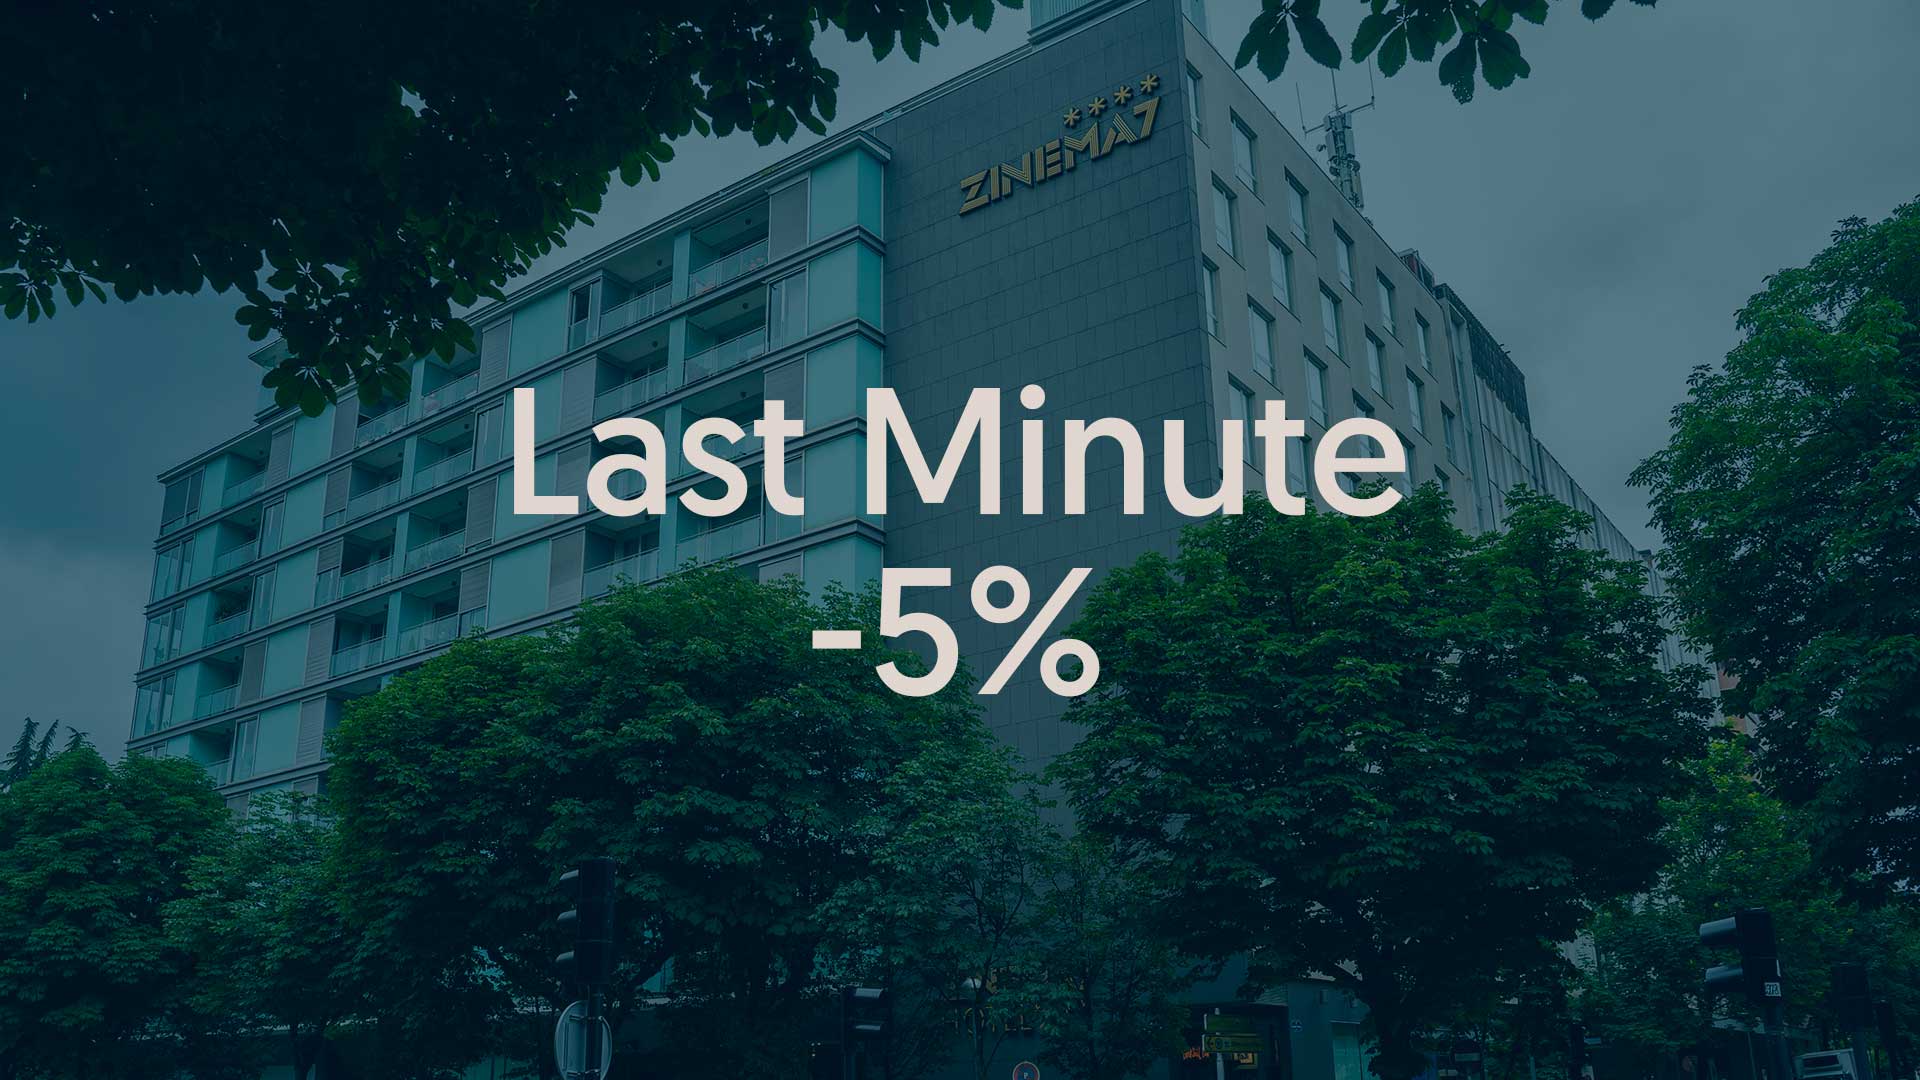 Last Minute Offer -5%!